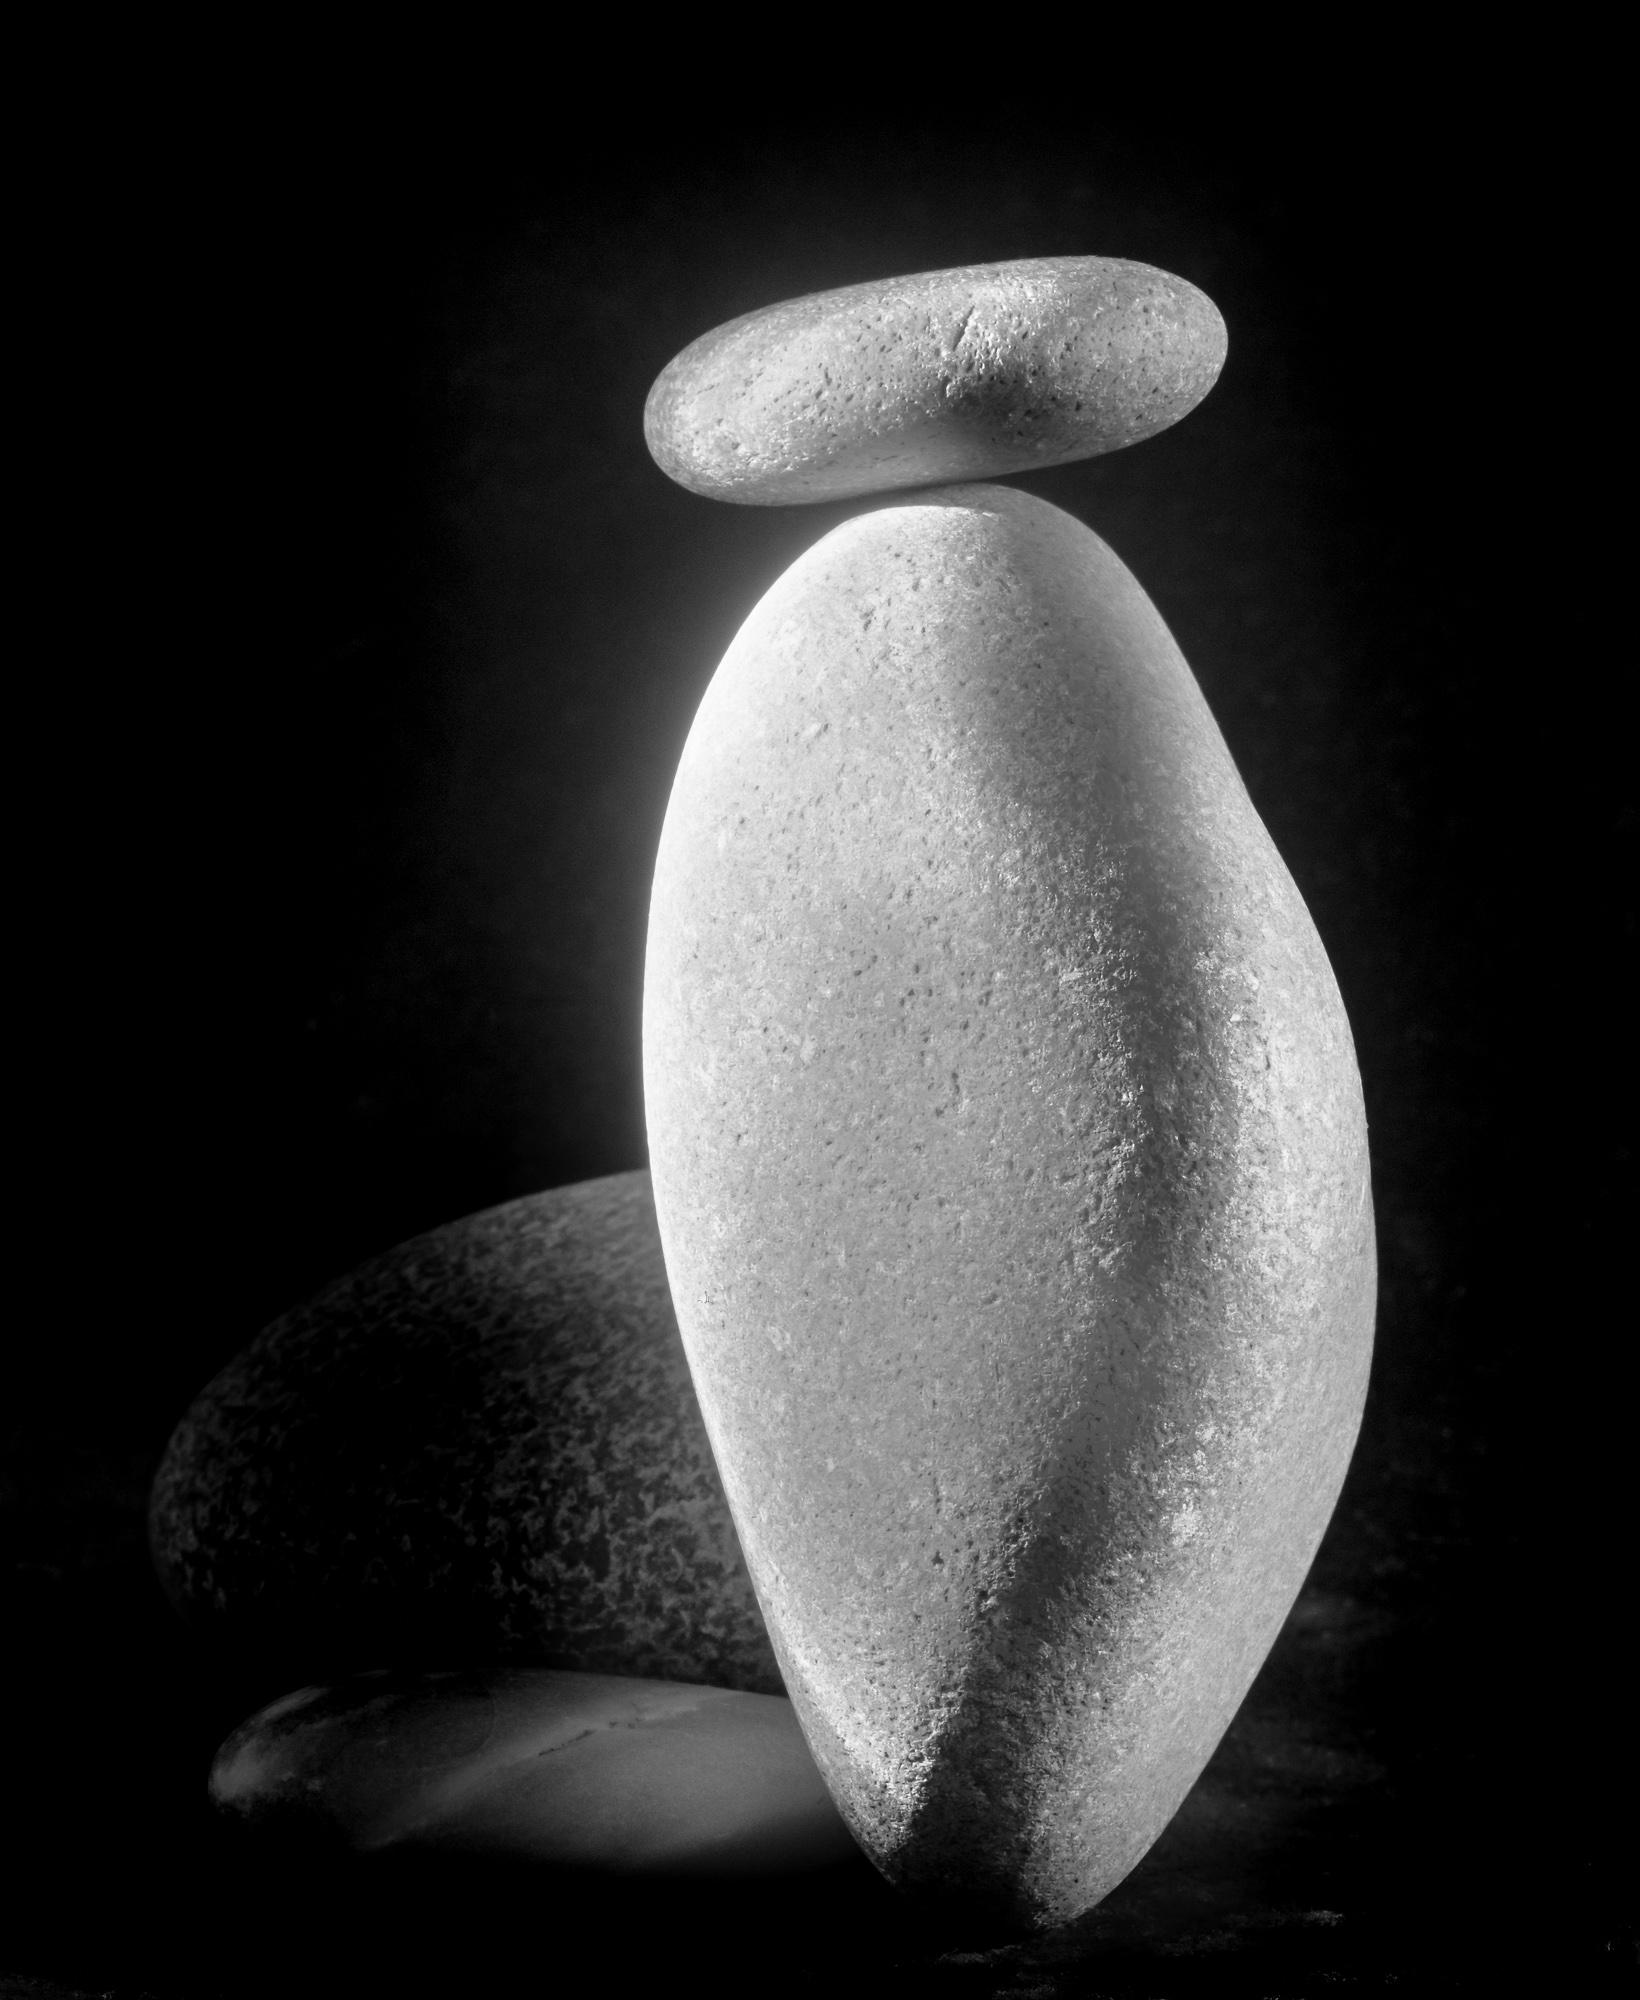  Limited Edition Black and White Still Life Photograph Water Stones #29, 20 x 24